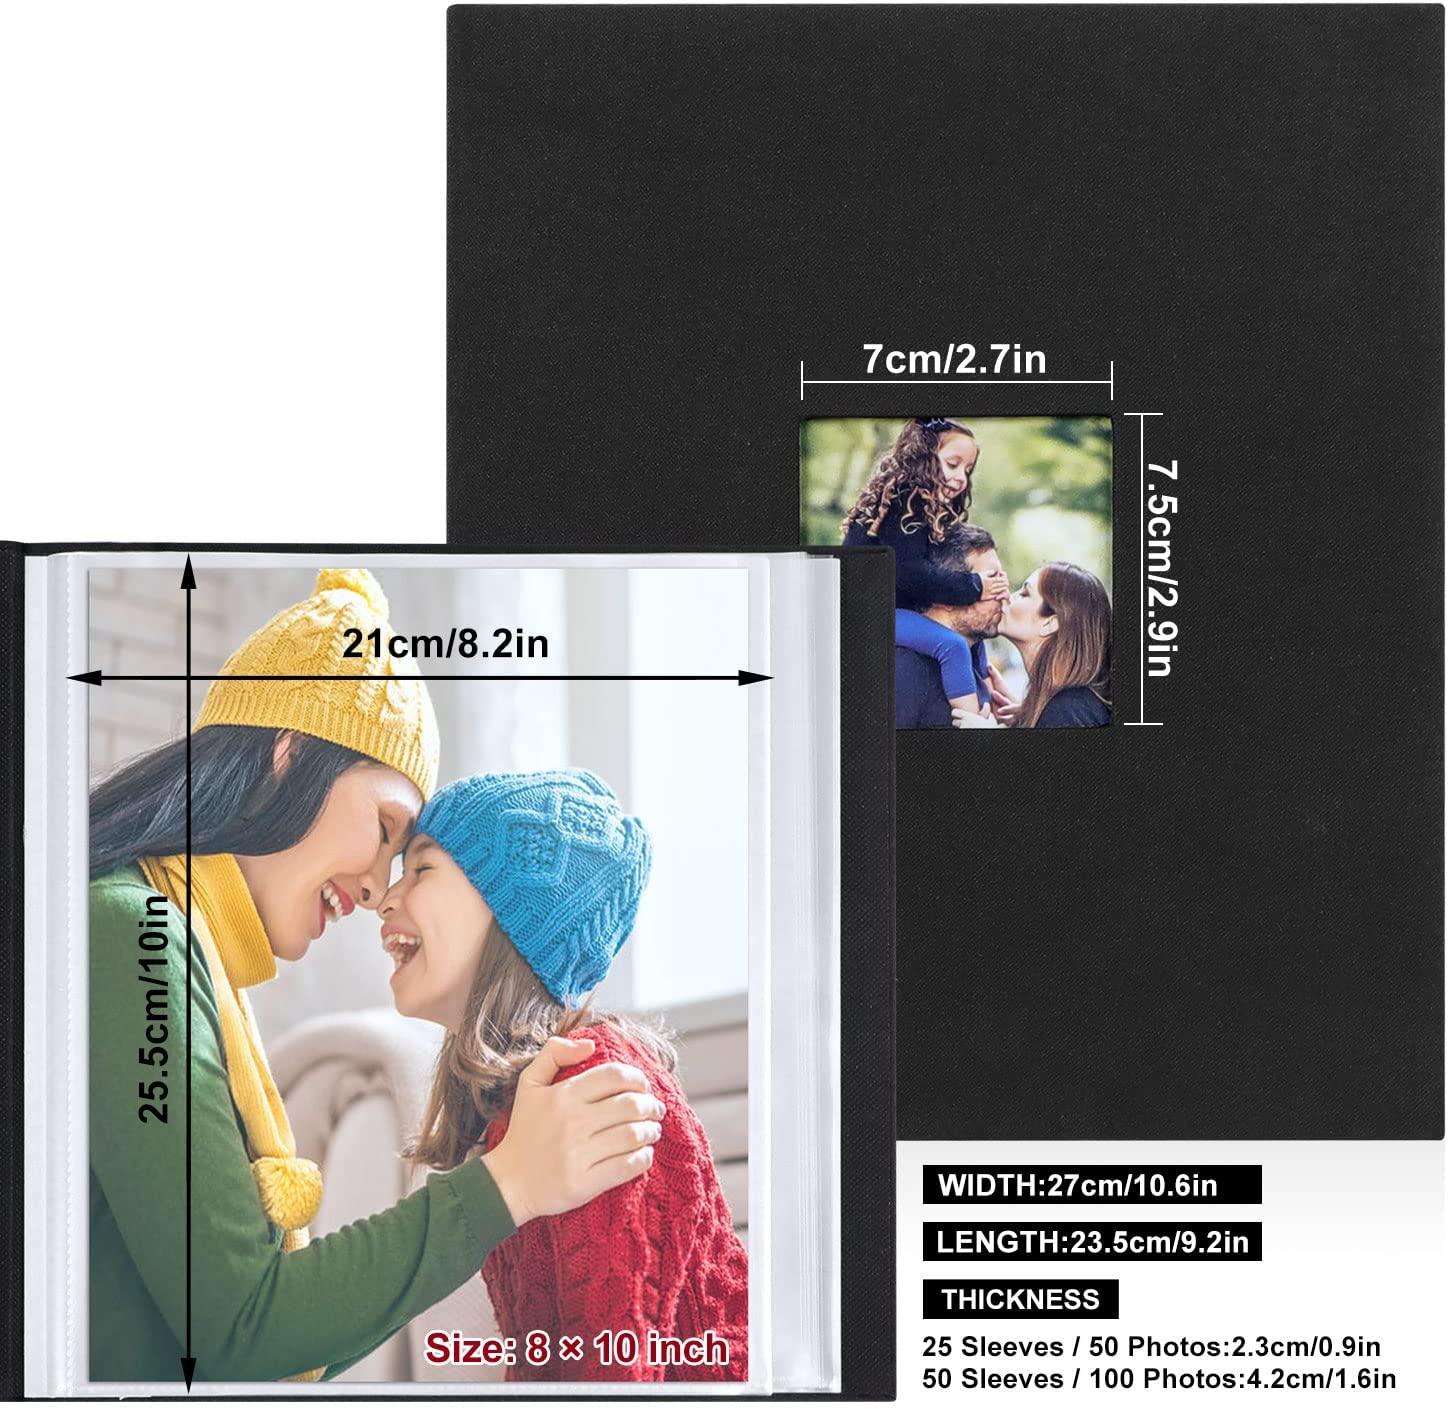  Lanpn Photo Album 4x4 2 Packs, Linen Hard Cover Small Archival  Acid Free Top Load Pocket Photo Book with Sleeves that Holds 52 Vertical  Only 4 x 4 Picture (Black) : Everything Else